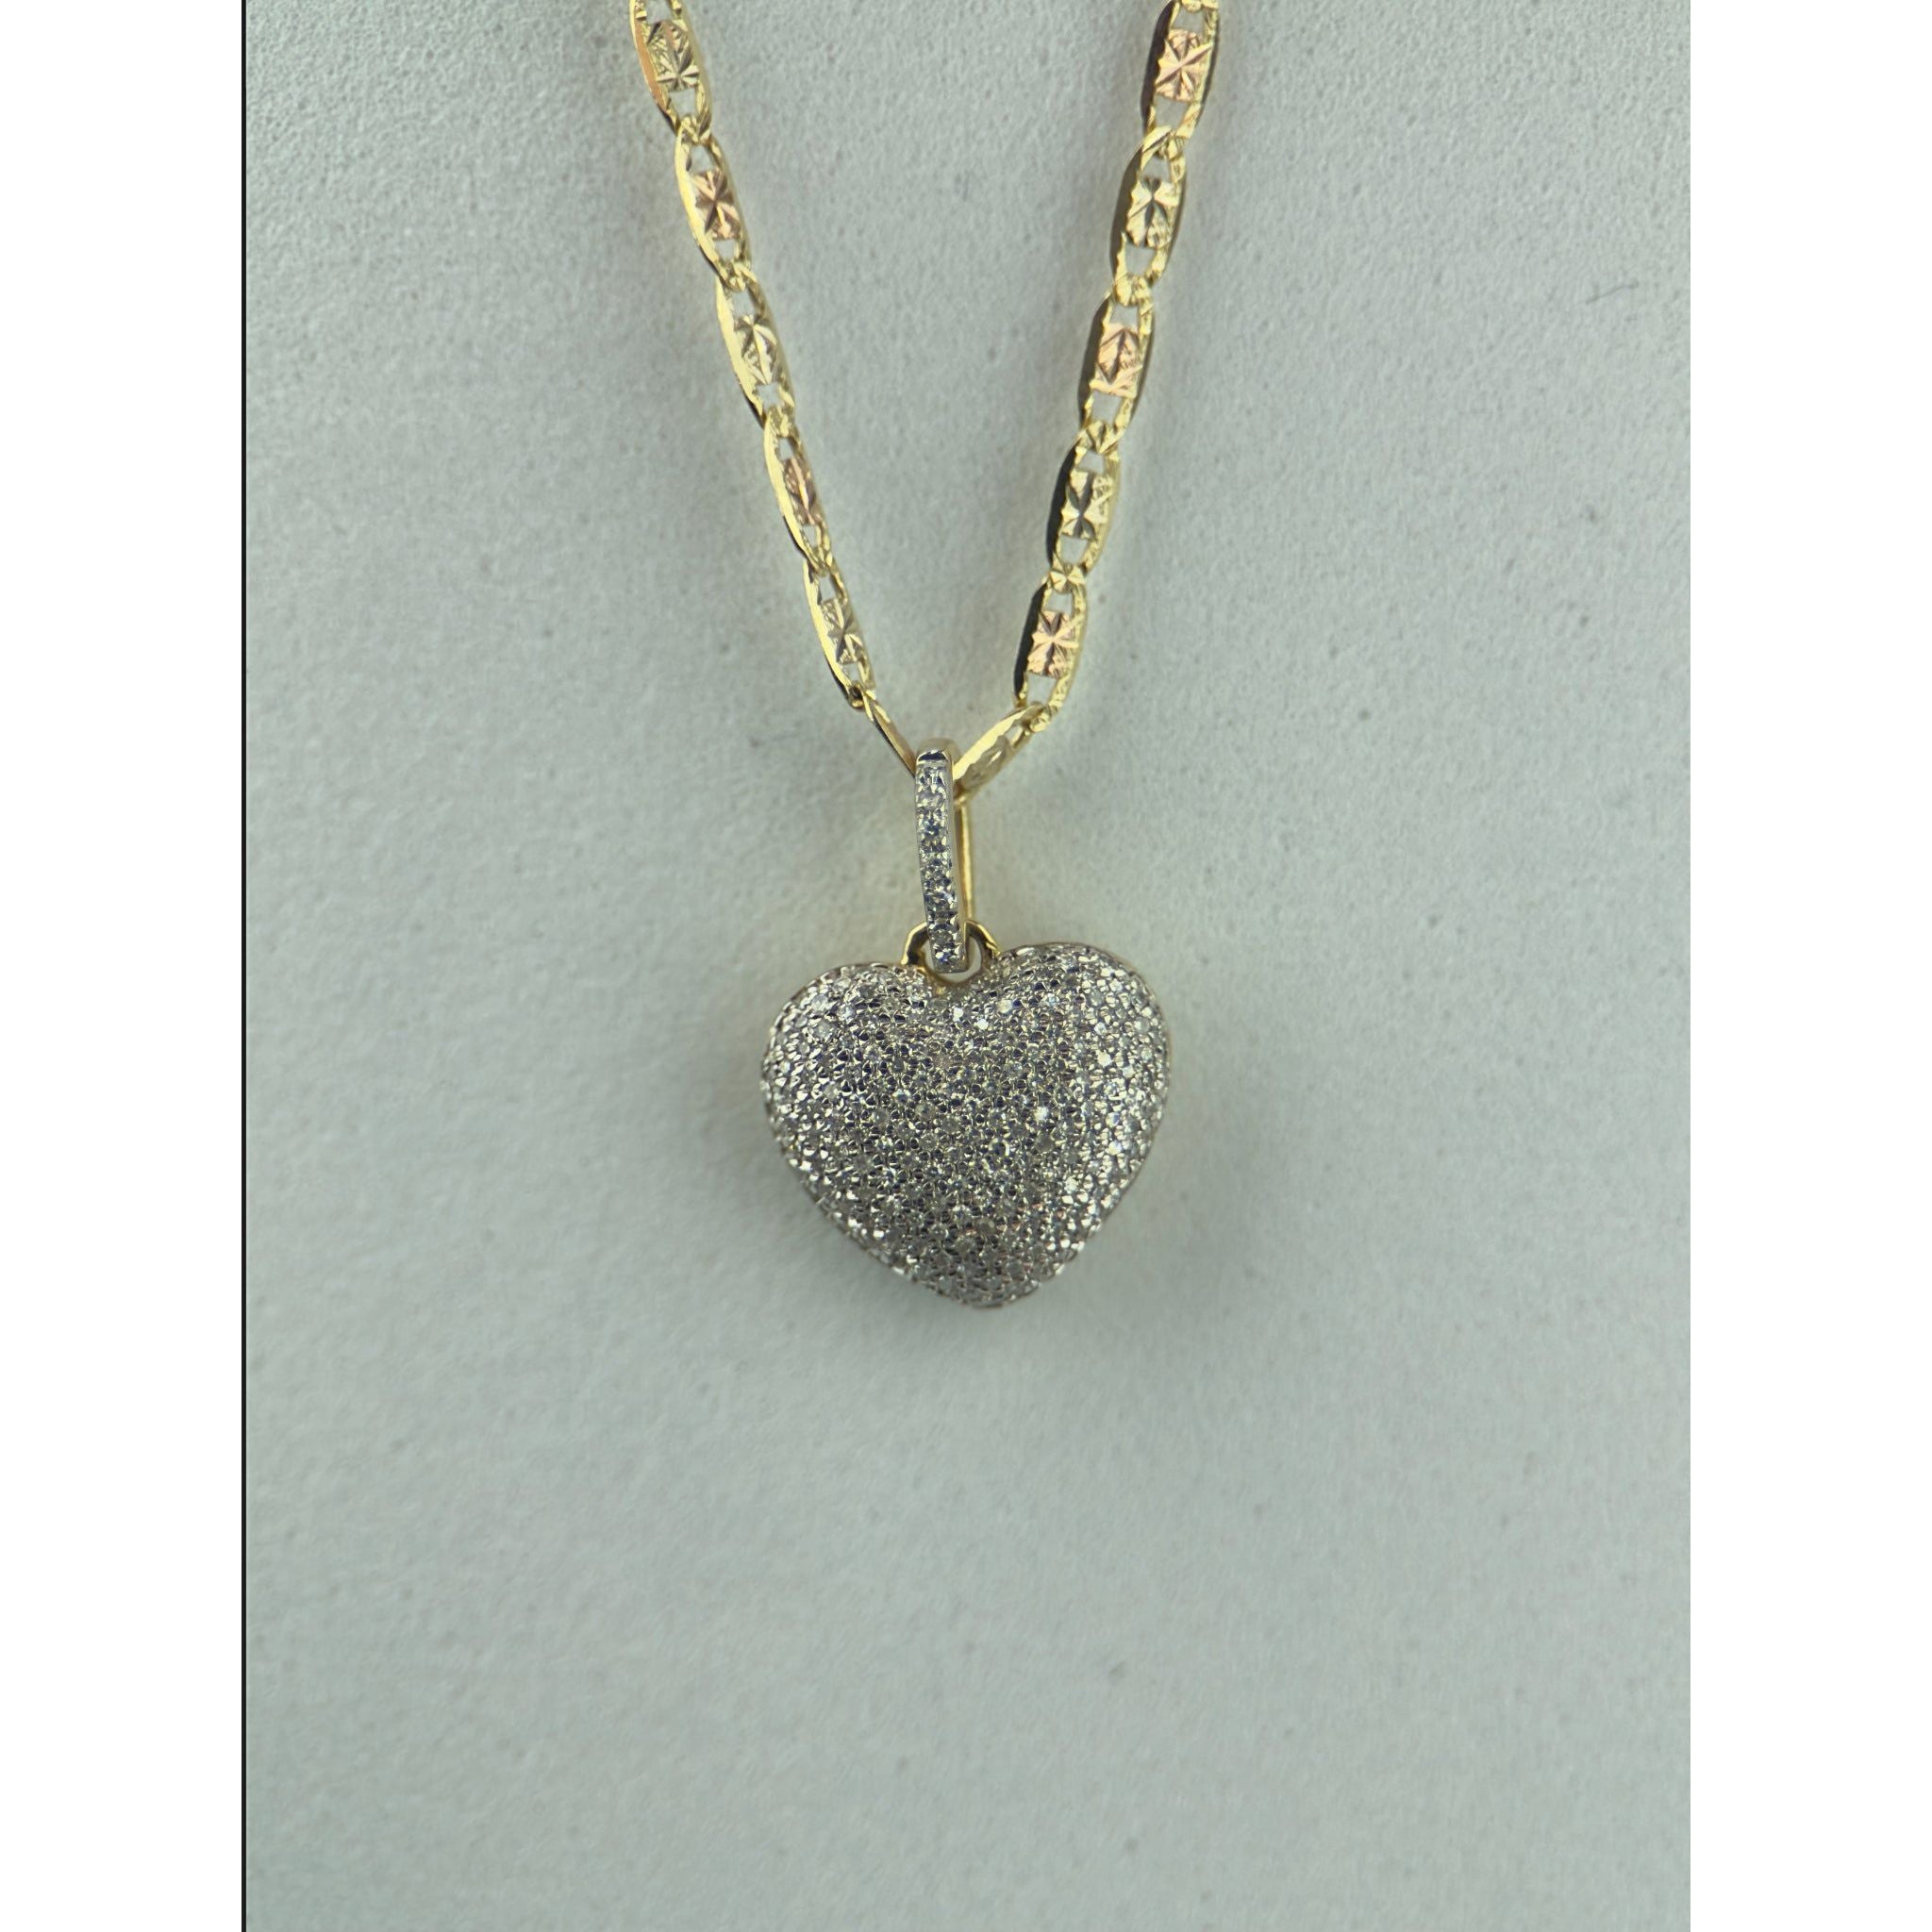 DR2353 - 14K Yellow Gold - Diamond - Pendant and Chain